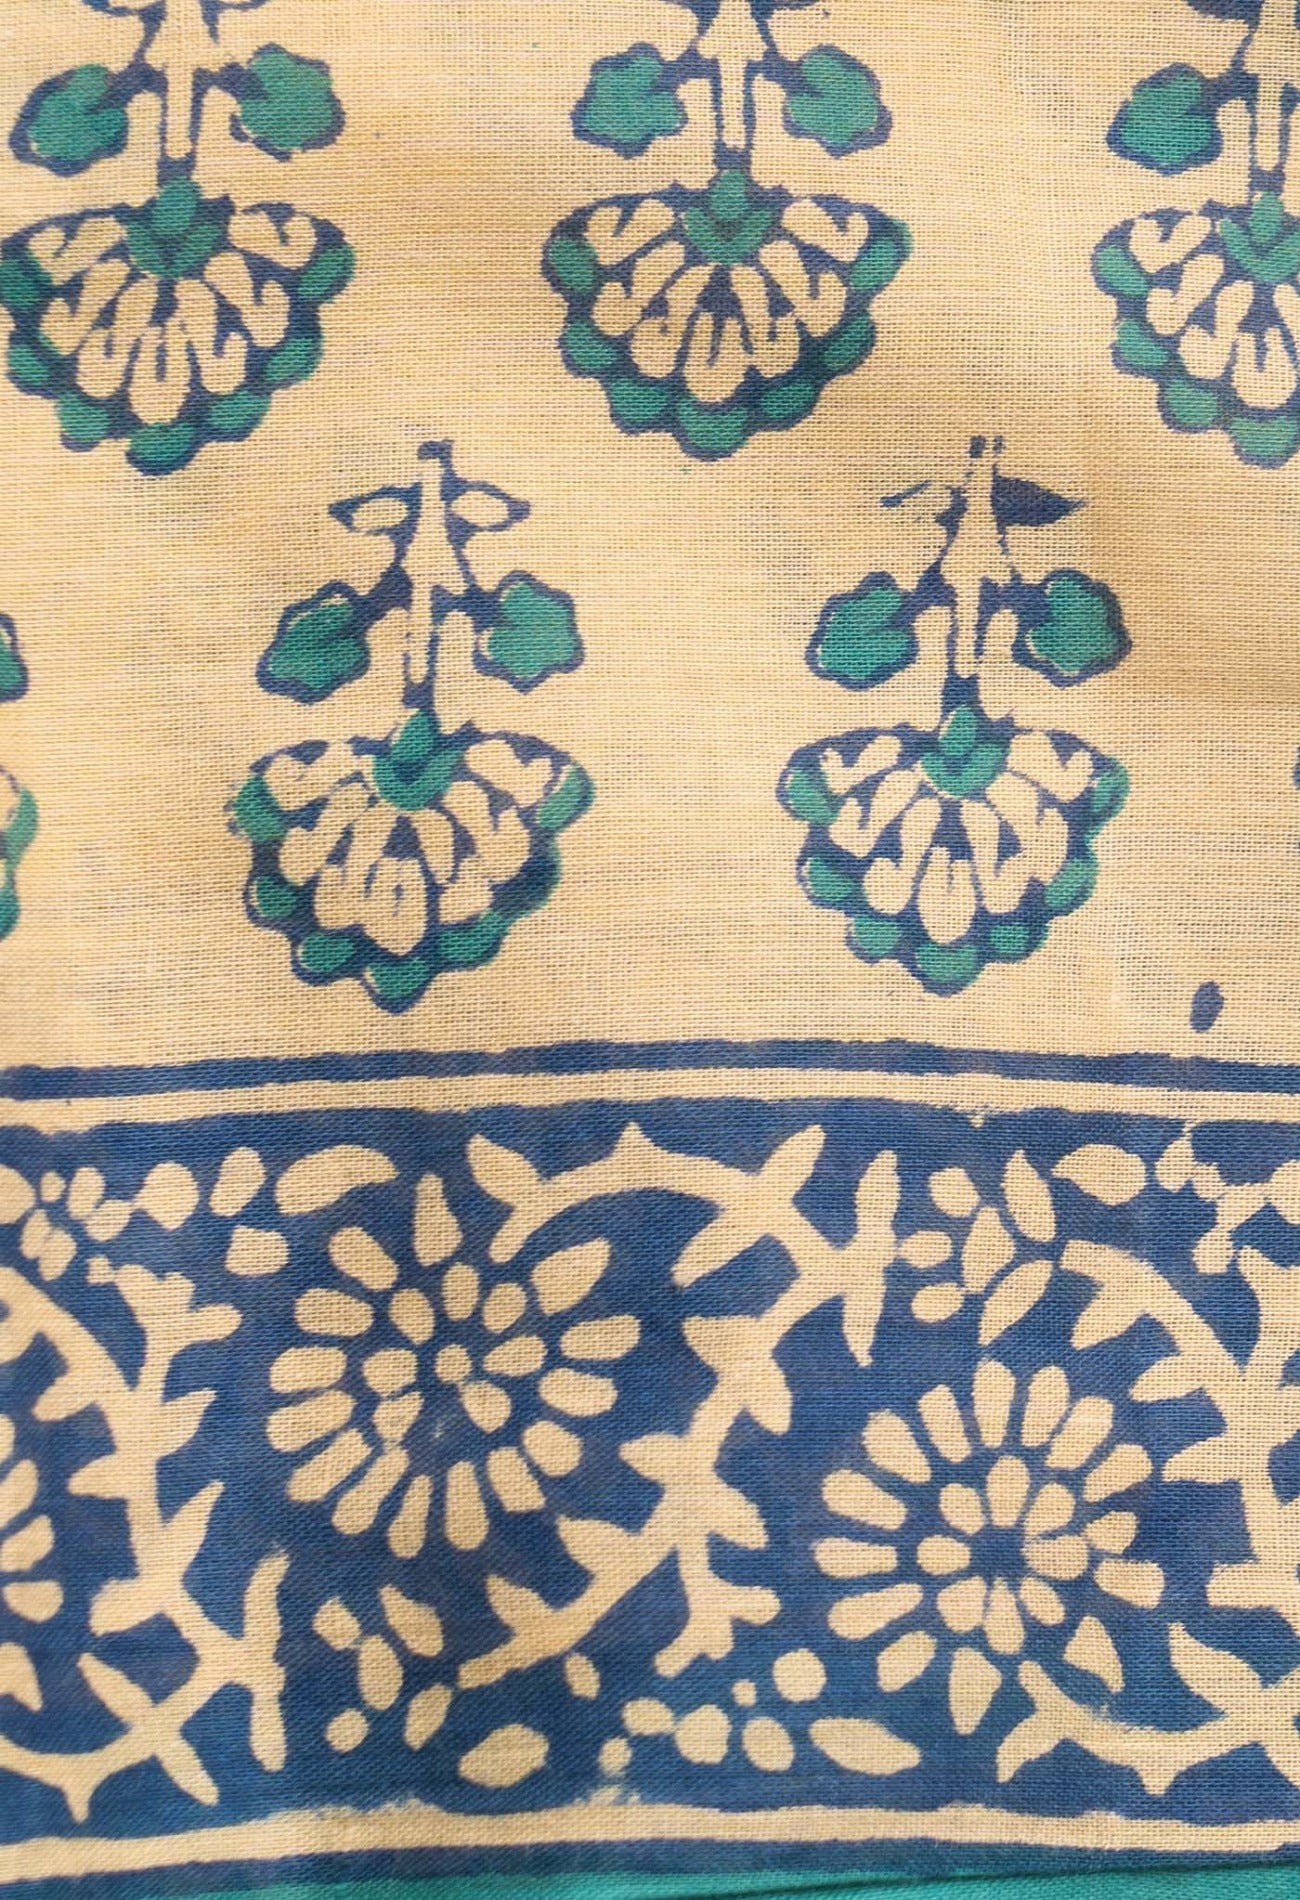 Online Shopping for Cream Pure Mulmul Cotton Saree with Hand Block Prints from Rajasthan at Unnatisilks.com India
